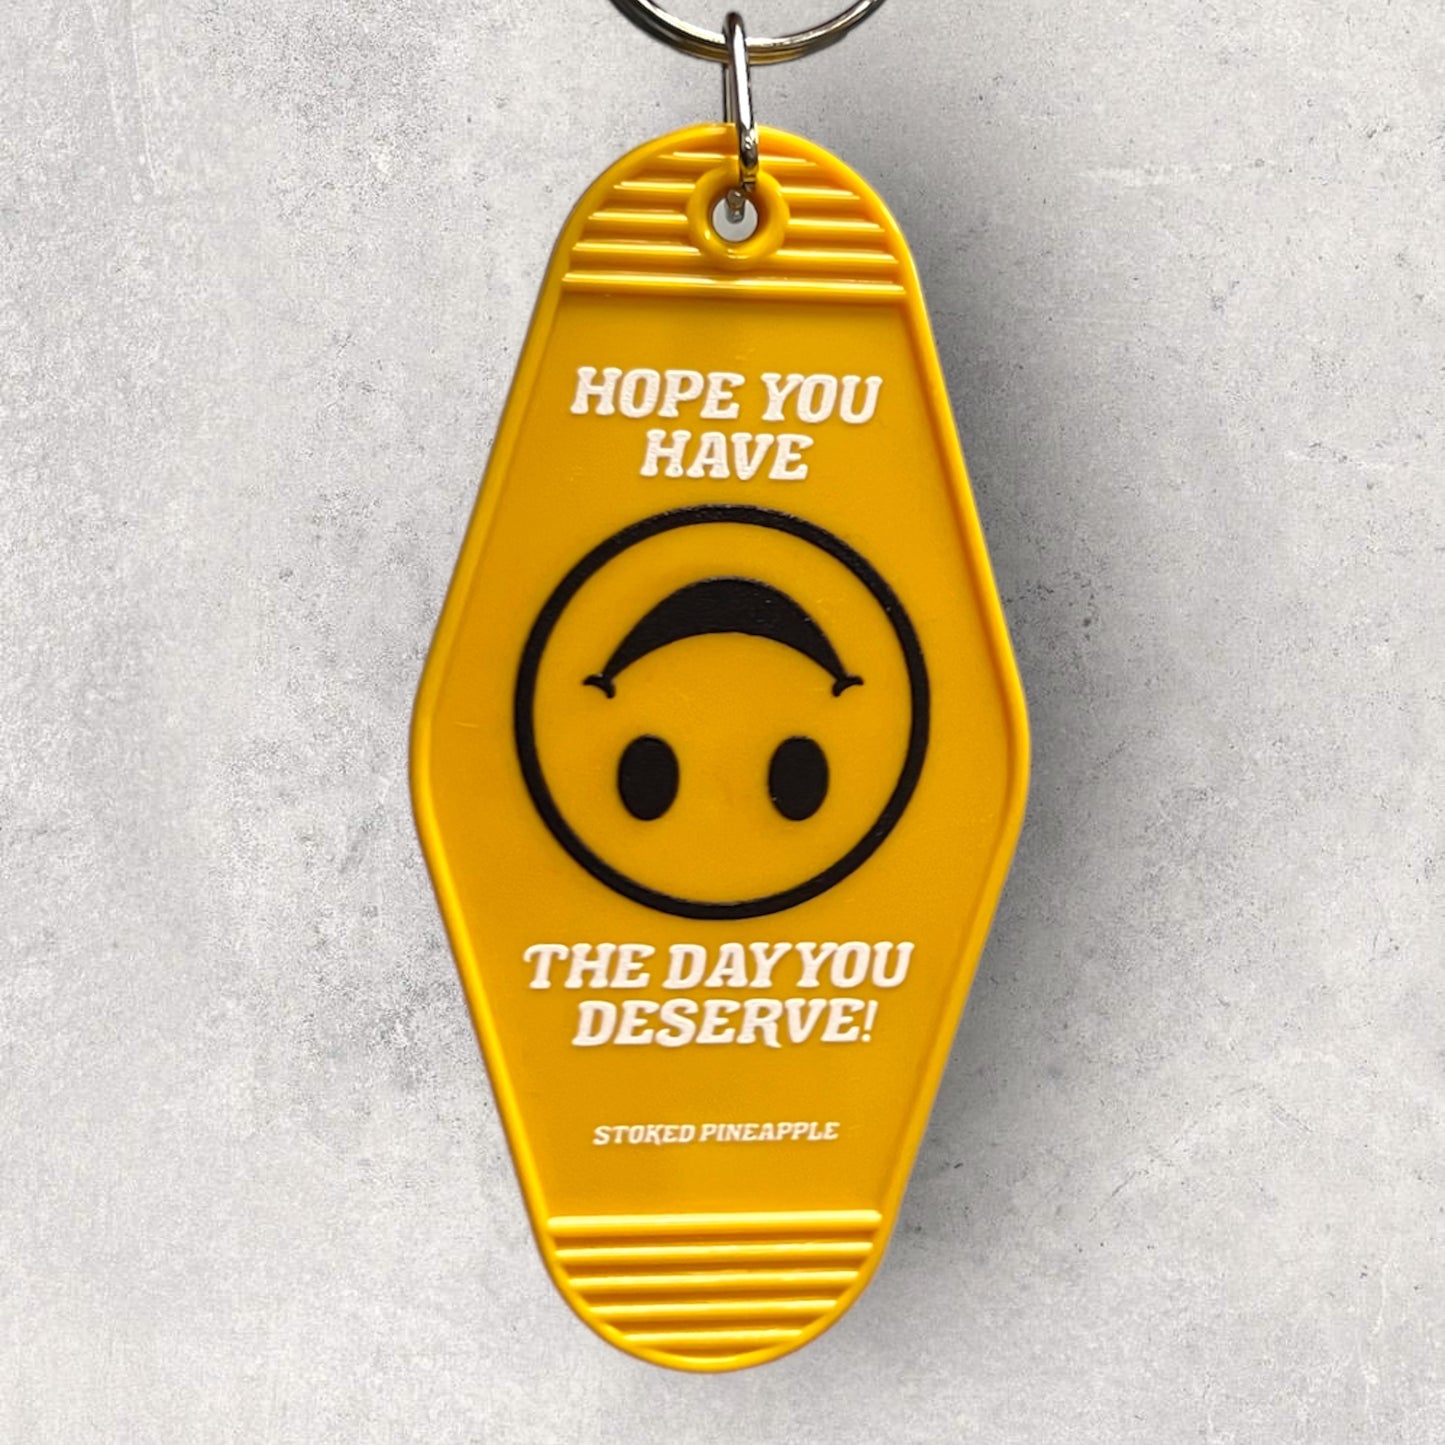 Have The Day You Deserve Motel Keychain